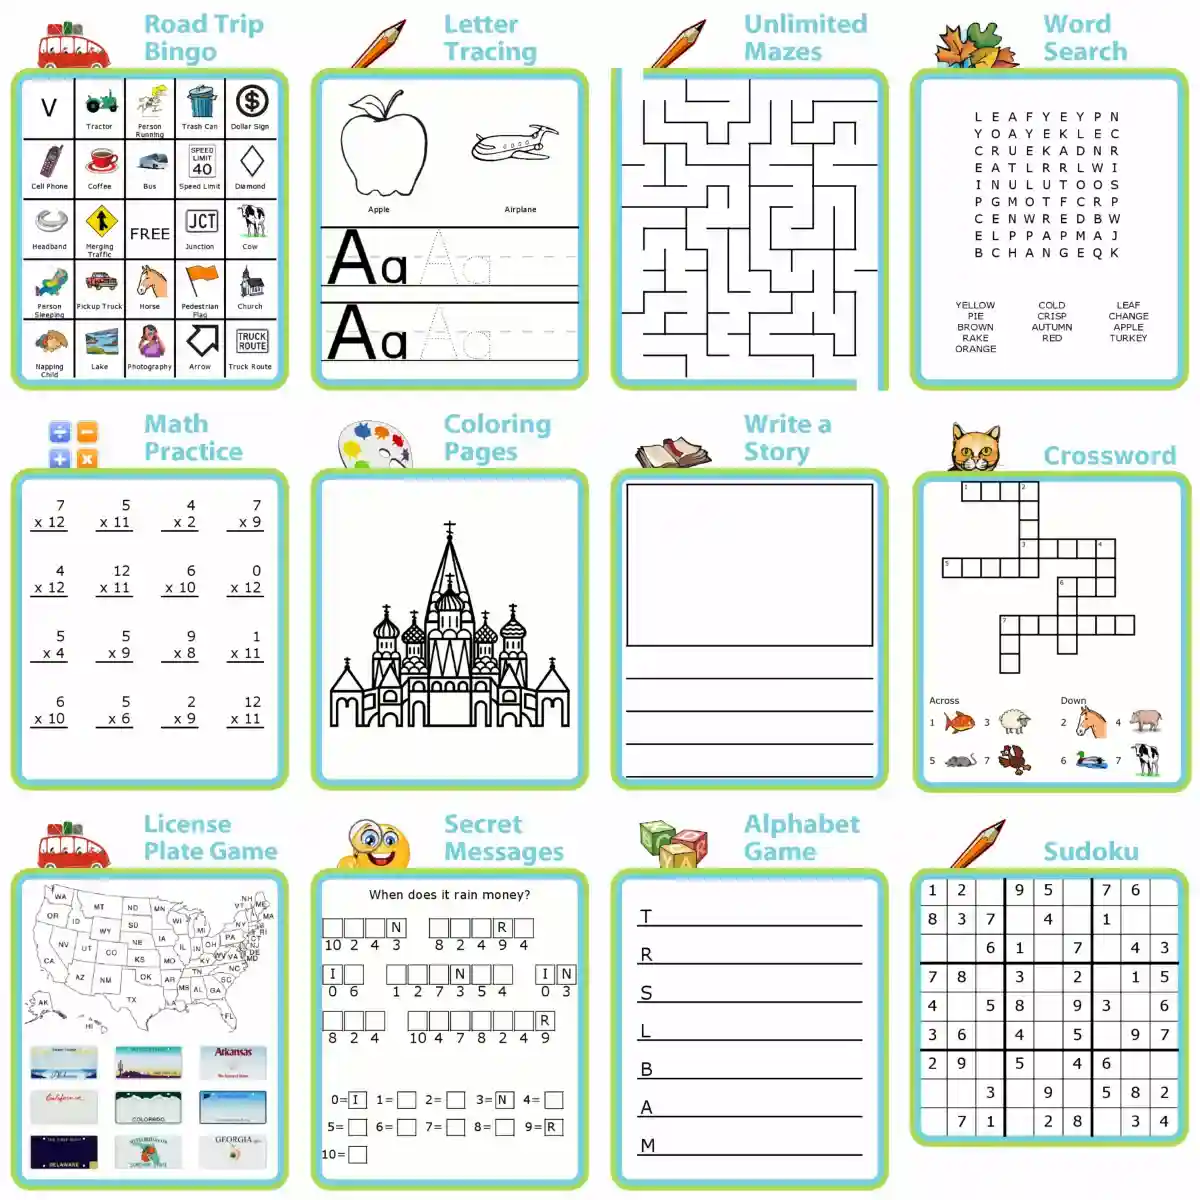 12 printable activities: bingo, letter tracing, mazes, word search, math practice, coloring, writing, crosswords, license plate game